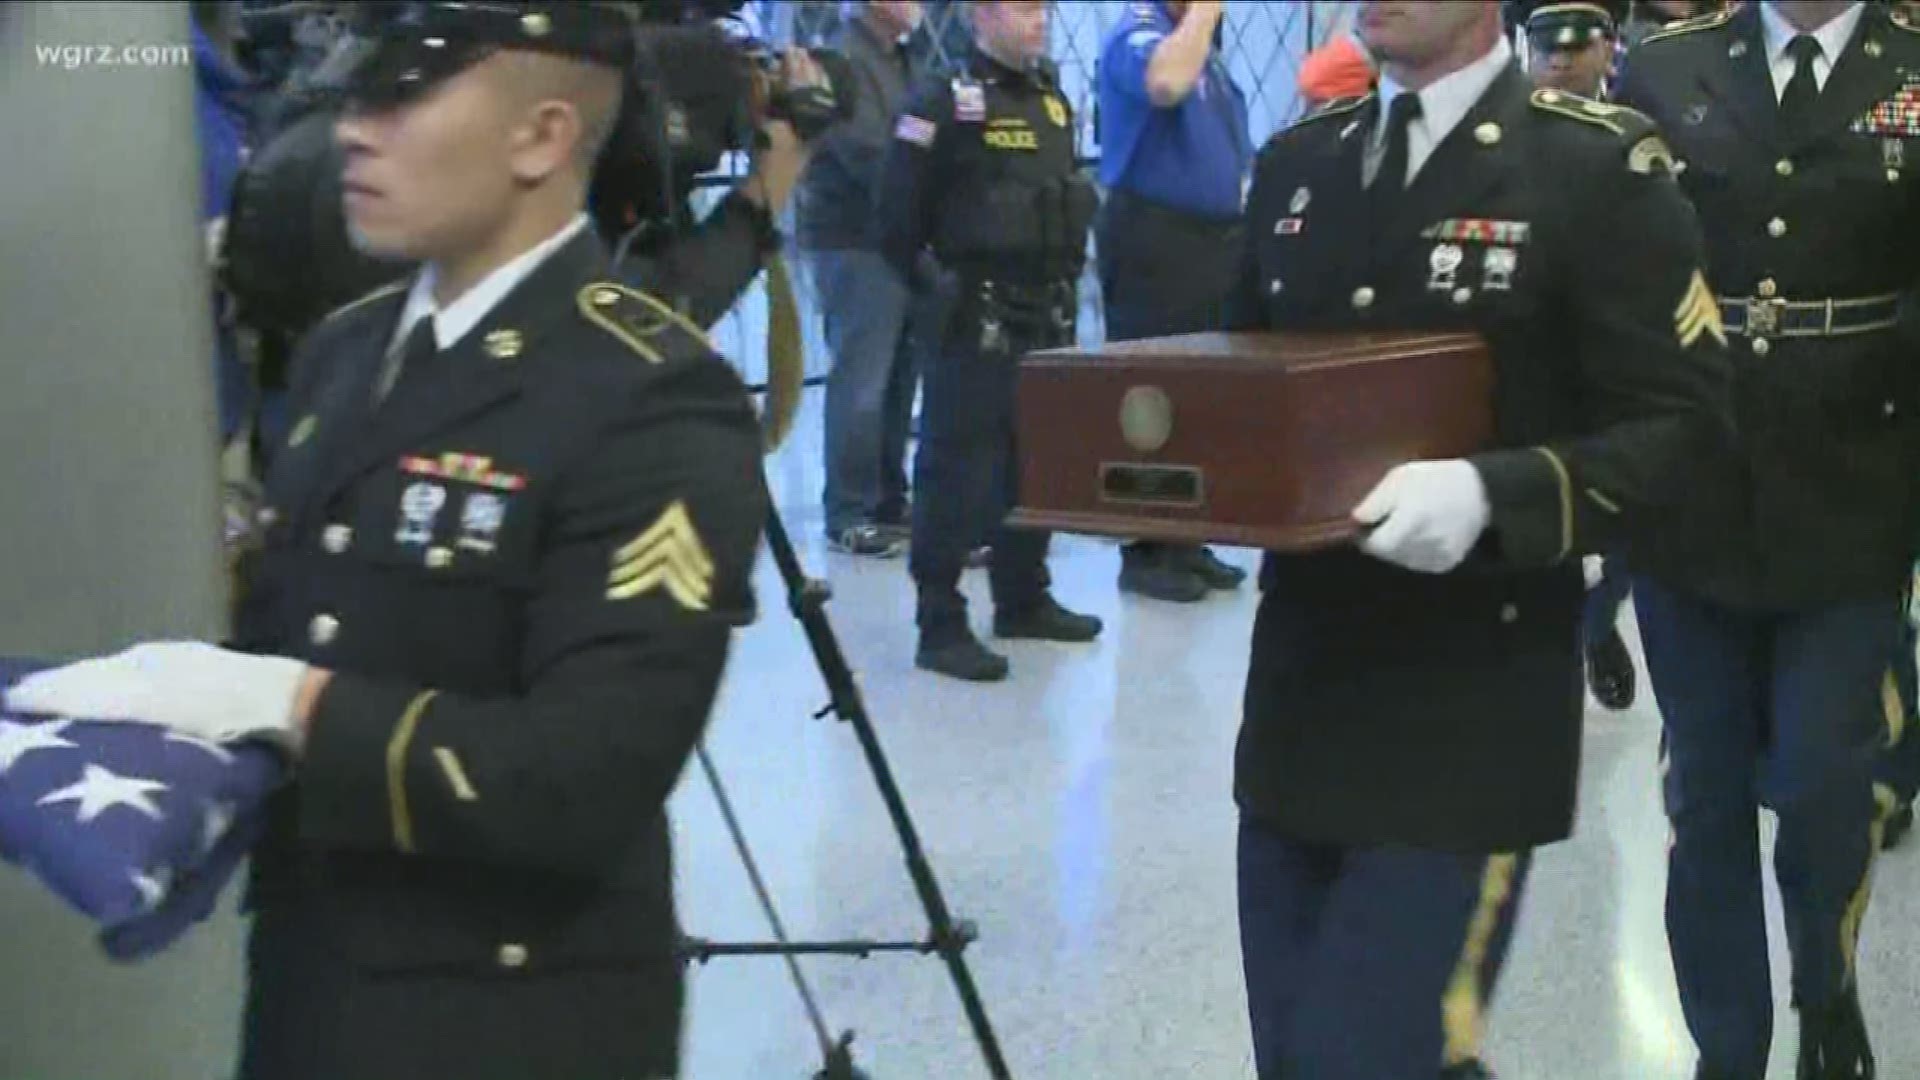 NORTH KOREAN LEADER KIM JONG-UN, NORTH KOREA TURNED OVER 55 BOXES with the REmAINS OF AMERICAN SERVICE MEMBERS.